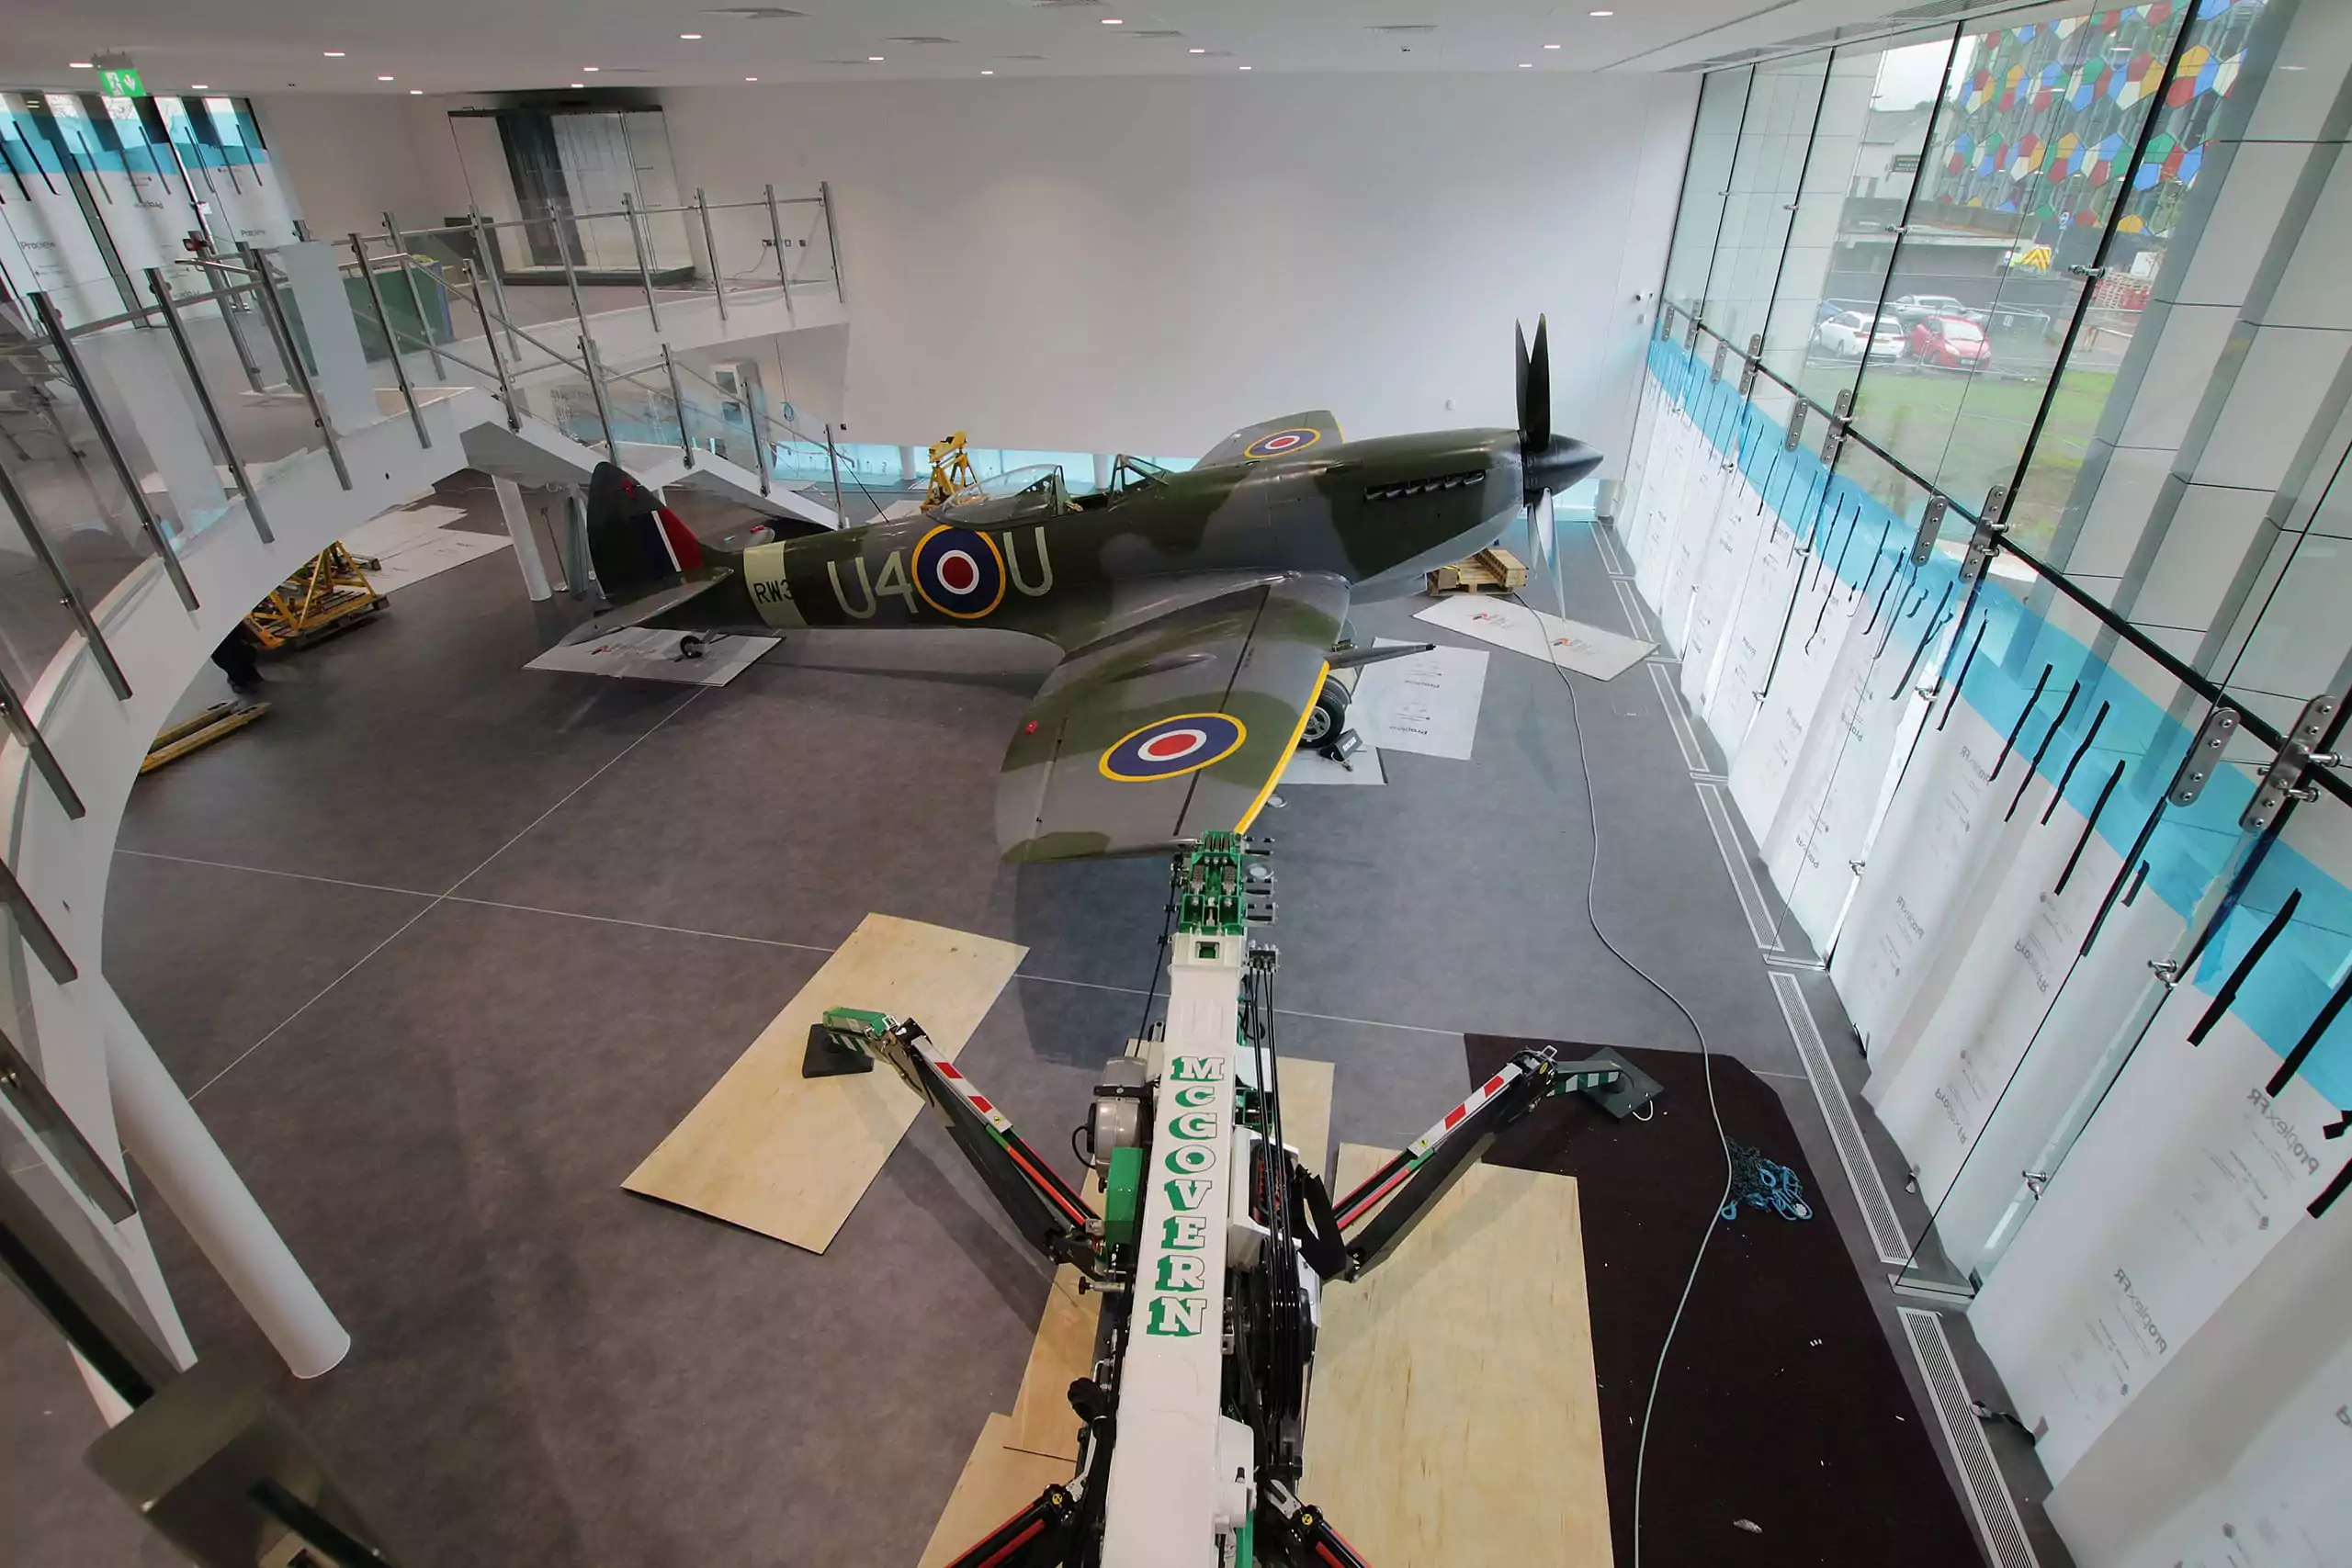 Spitfire RW388 reconstruction revealed in time-lapse video